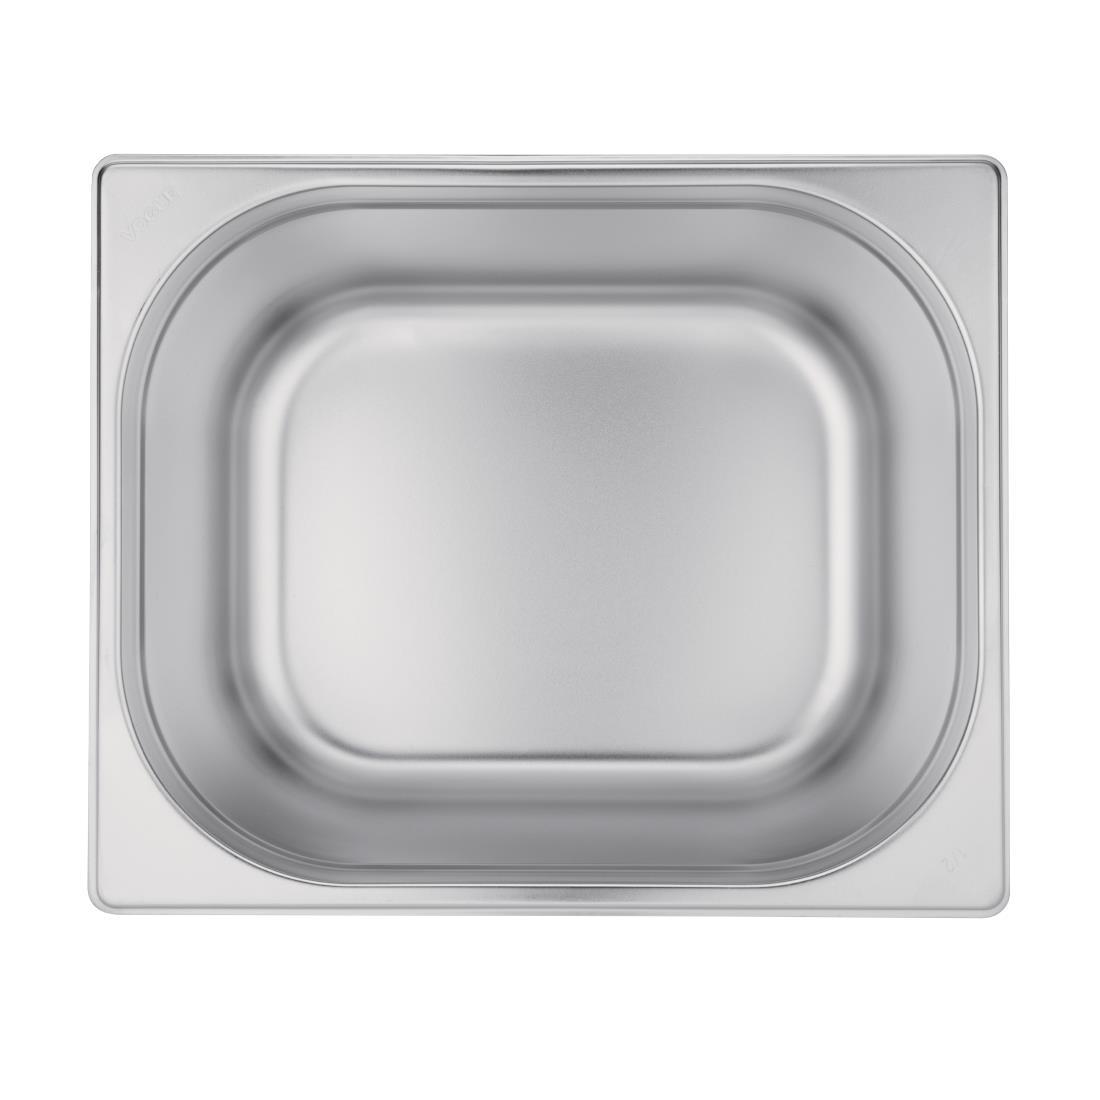 Vogue Stainless Steel 1/2 Gastronorm Pan 200mm - K932  - 4